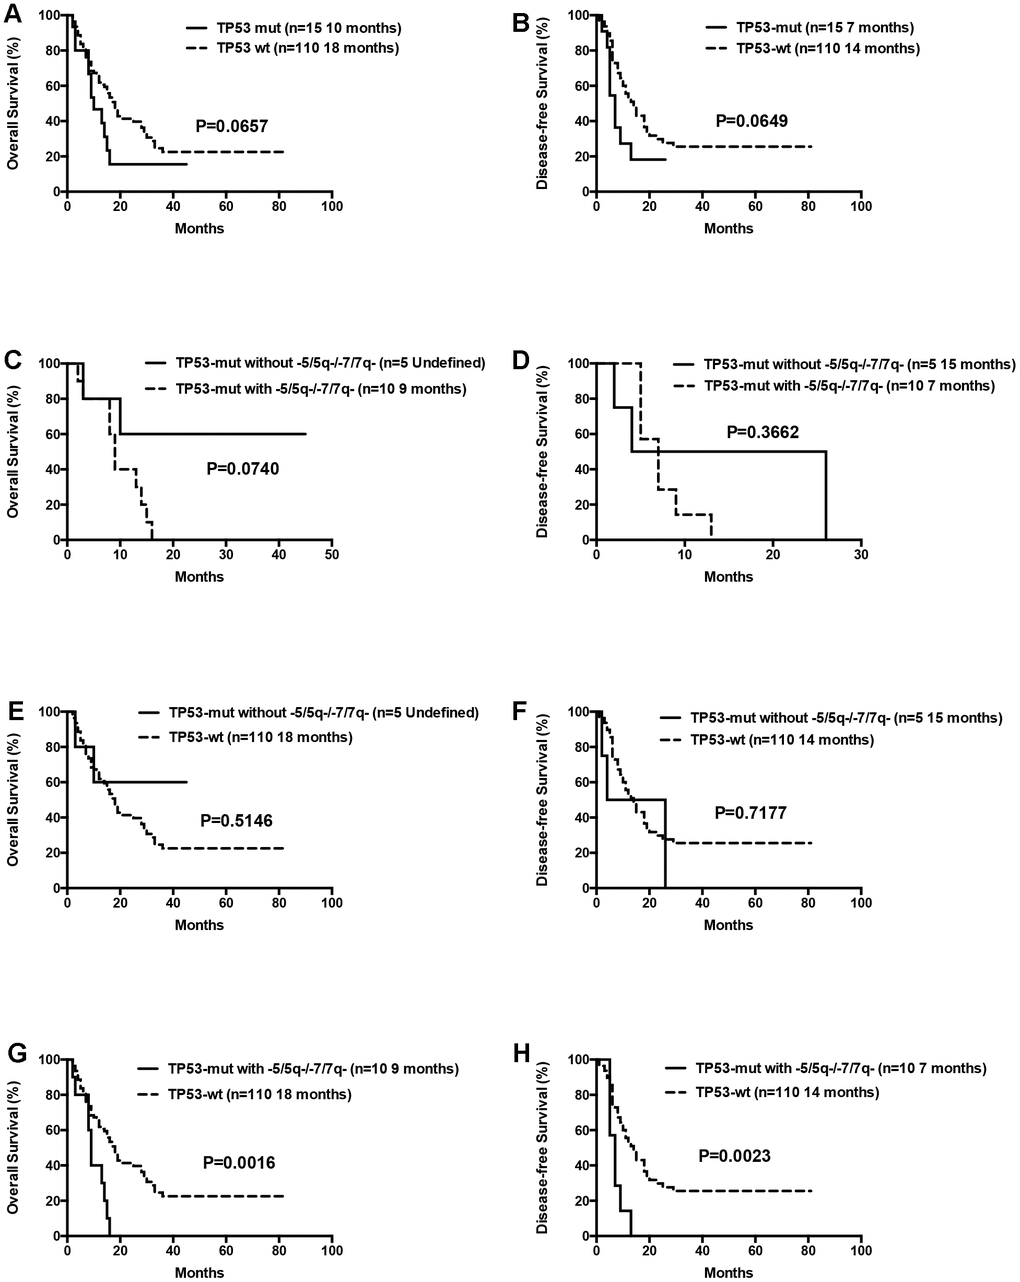 Overall survival and disease free survival according to TP53 mutations. (A) Overall survival in TP53 mutated compared to TP53 wild-type patients. (B) Disease free survival in TP53 mutated compared to TP53 wild-type patients. (C) Overall survival in isolated TP53 mutated patients compared to those with TP53 mutations and concomitant -5/5q- and/or -7/7q- chromosomal deletions. (D) Disease free survival in isolated TP53 mutated patients compared to those with TP53 mutations and concomitant -5/5q- and/or -7/7q- chromosomal deletions. (E) Overall survival in isolated TP53 mutated compared to TP53 wild-type patients. (F) Disease free survival in isolated TP53 mutated compared to TP53 wild-type patients. (G) Overall survival in patients with TP53 mutations and concomitant -5/5q- and/or -7/7q- chromosomal deletions compared to TP53 wild-type patients. (H) Disease free survival in patients with TP53 mutations and concomitant -5/5q- and/or -7/7q- chromosomal deletions compared to TP53 wild-type patients.